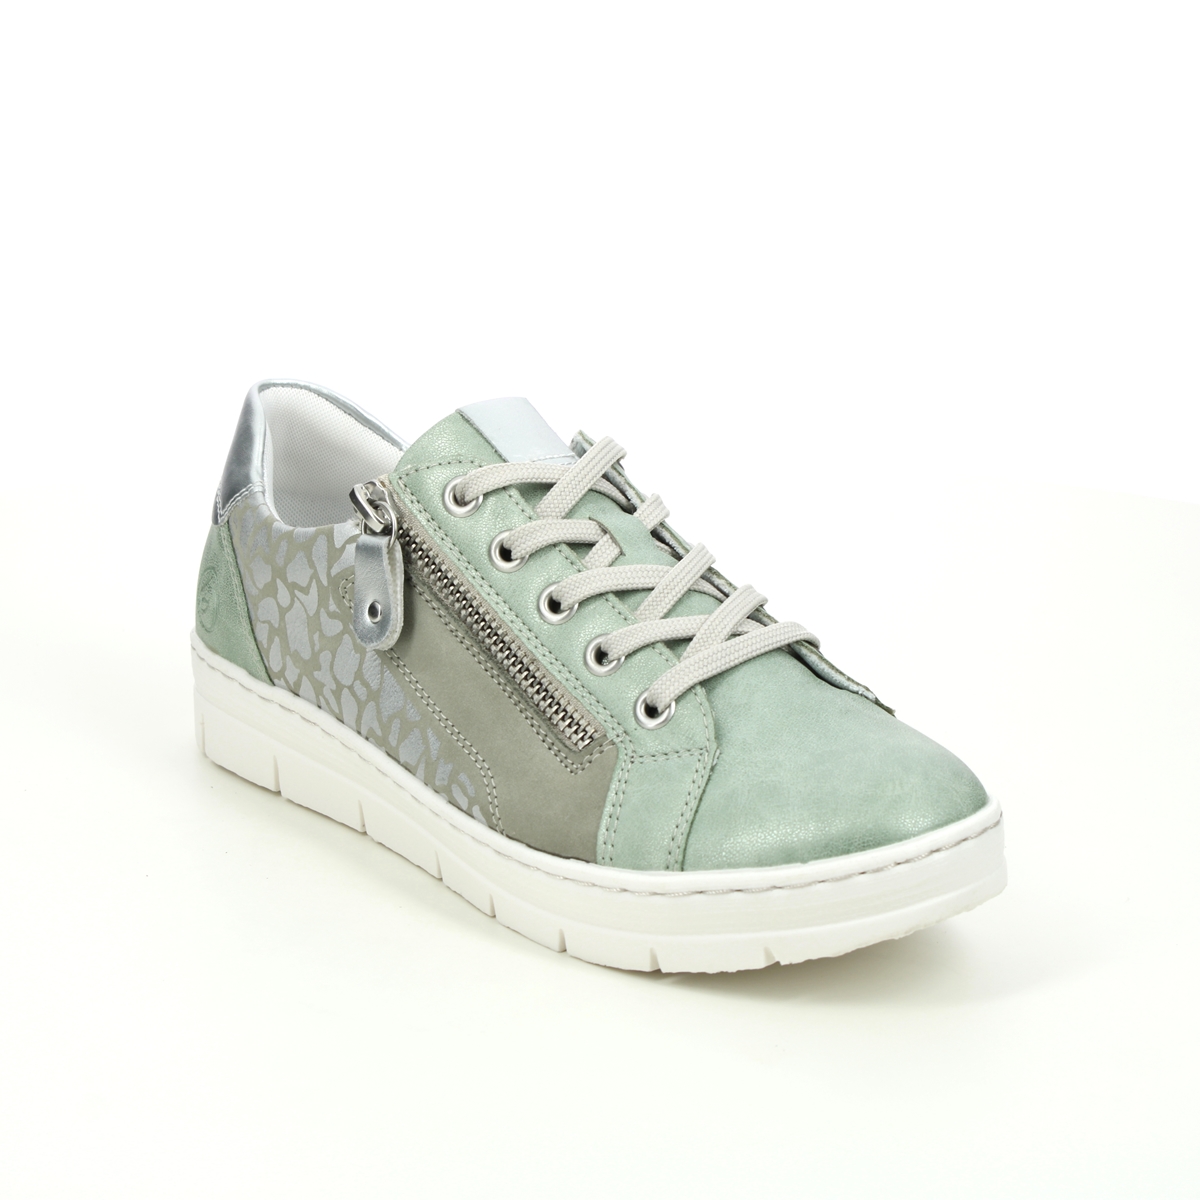 Remonte Ravenna 11 Mint Green Womens Trainers D5821-52 In Size 37 In Plain Mint Green